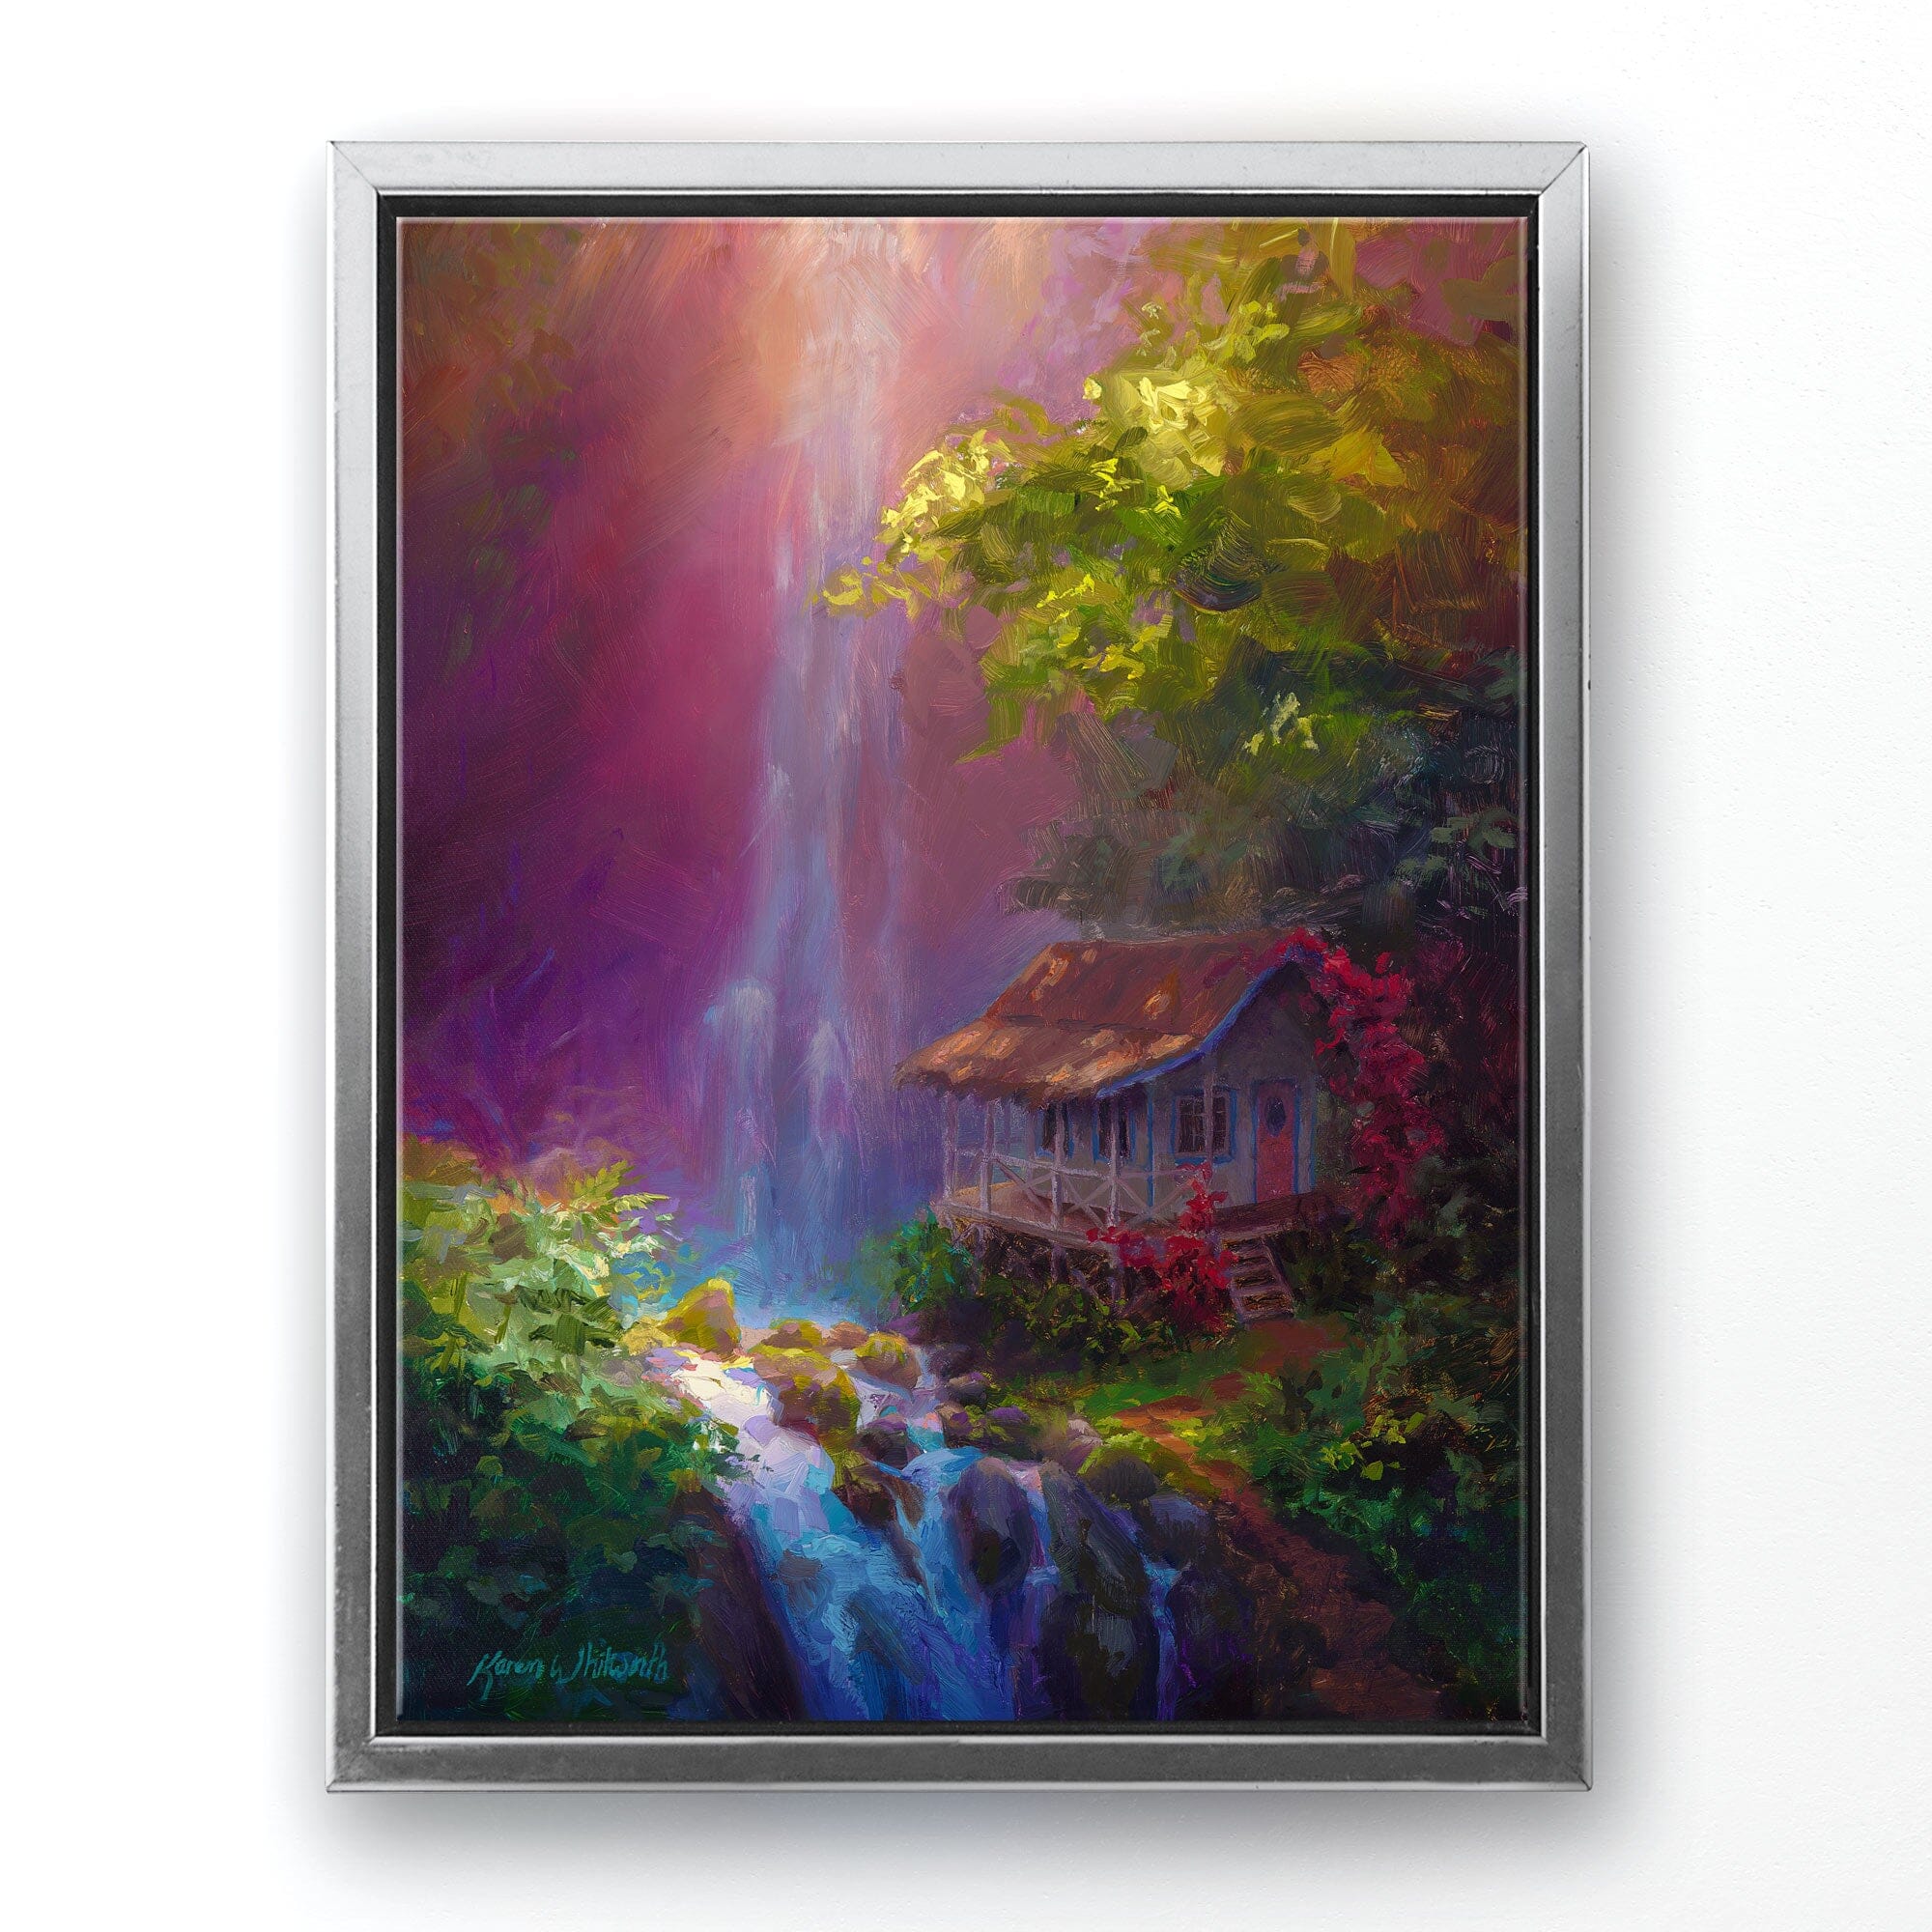 Landscape painting on canvas of Hawaiian waterfall by tropical artist Karen Whitworth titled "Healing Retreat". The canvas wall art is framed in a silver frame and is hanging on a white wall.